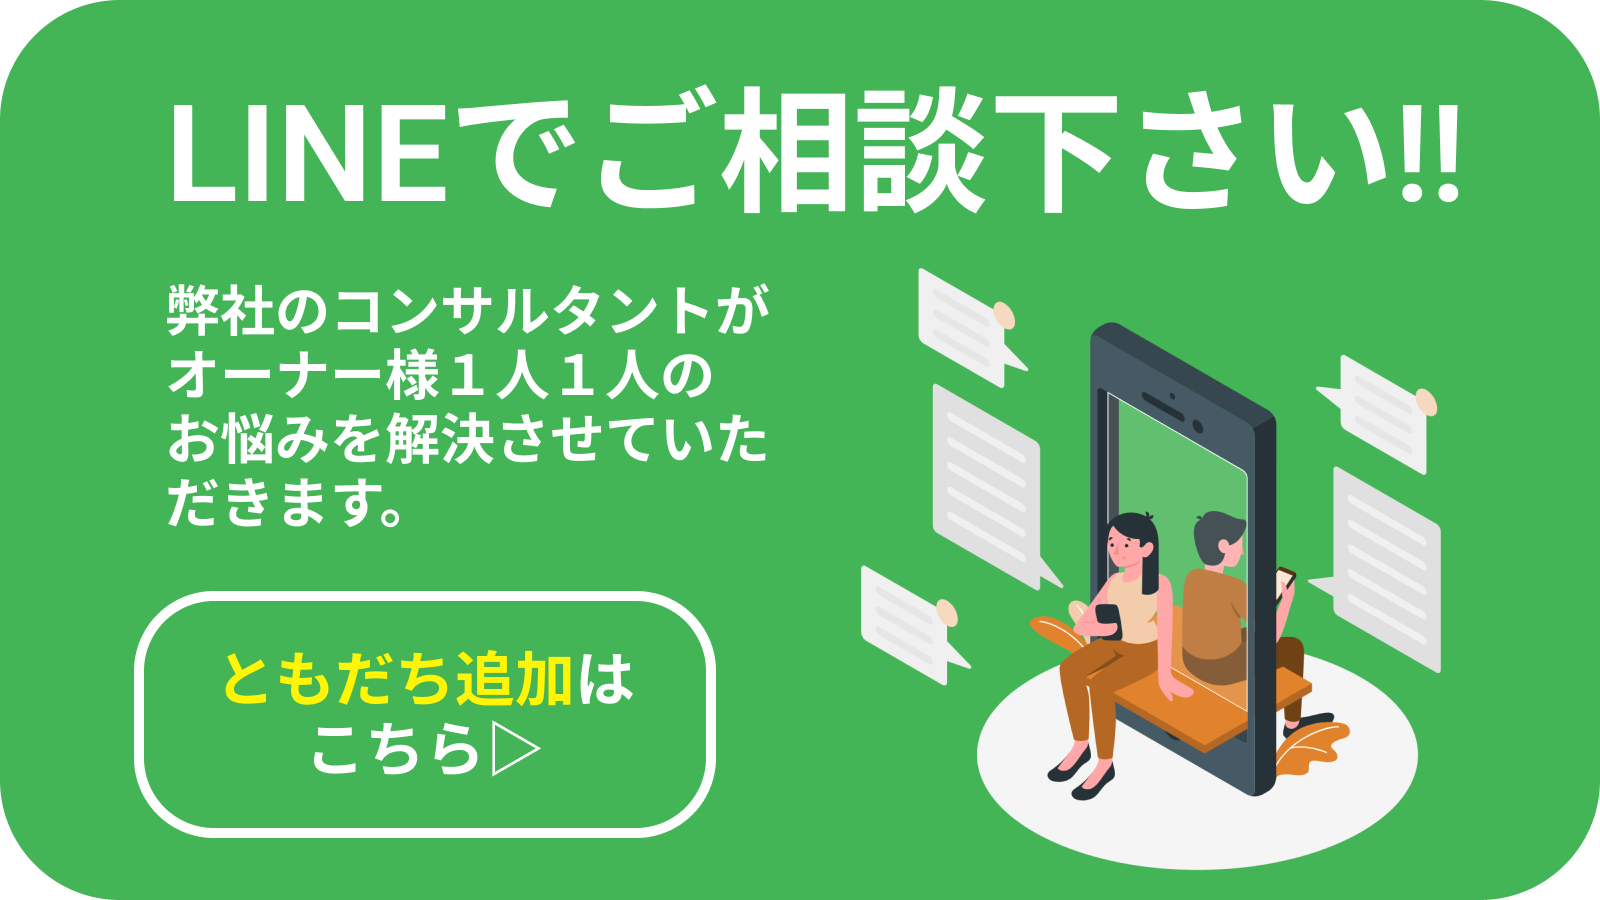 ExCAMP コンサルタント LINEアカウント